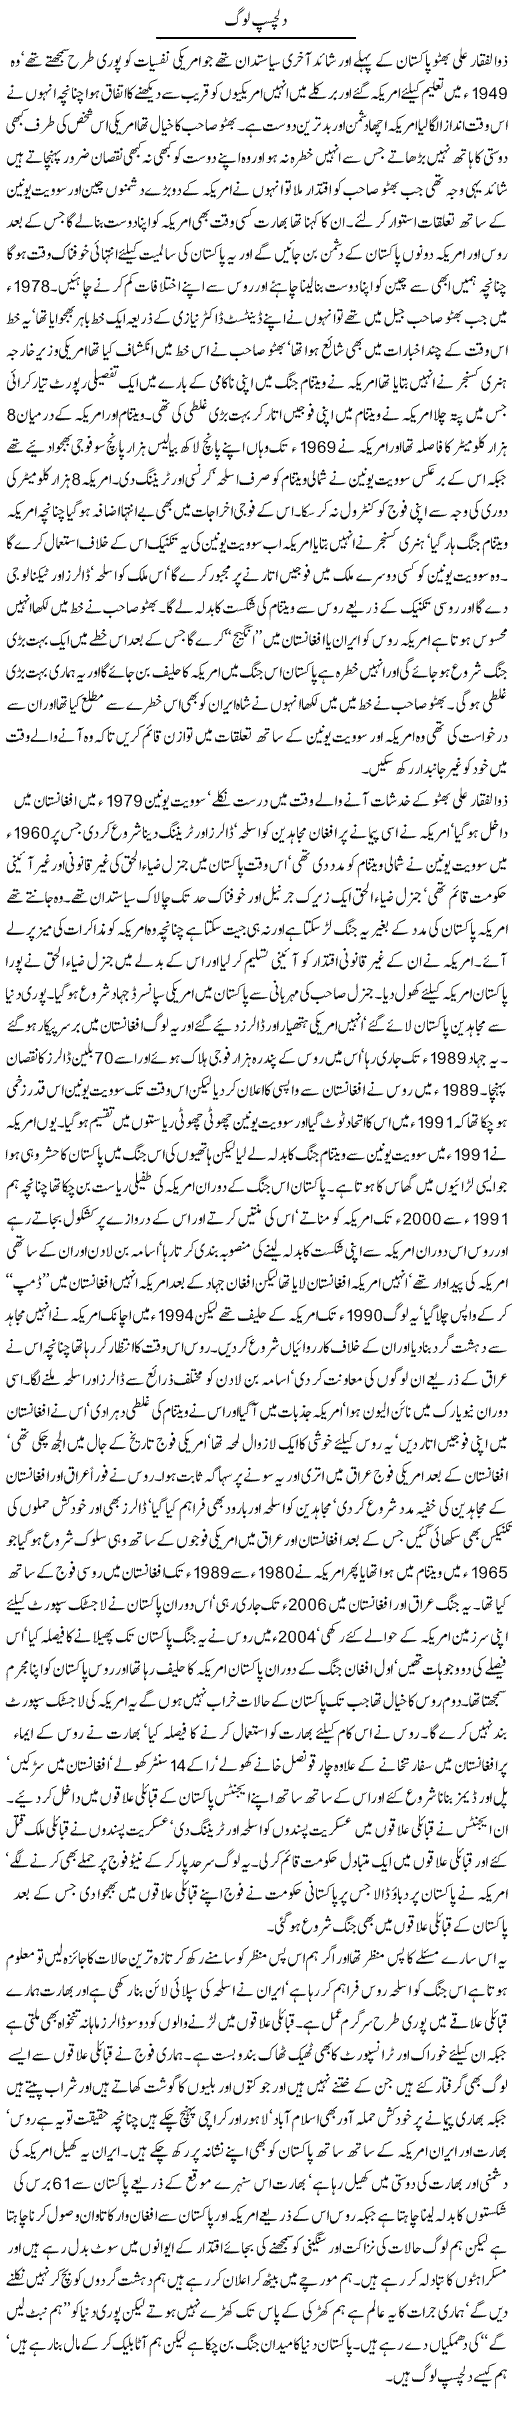 Dilchasp Log by Javed Chaudhry